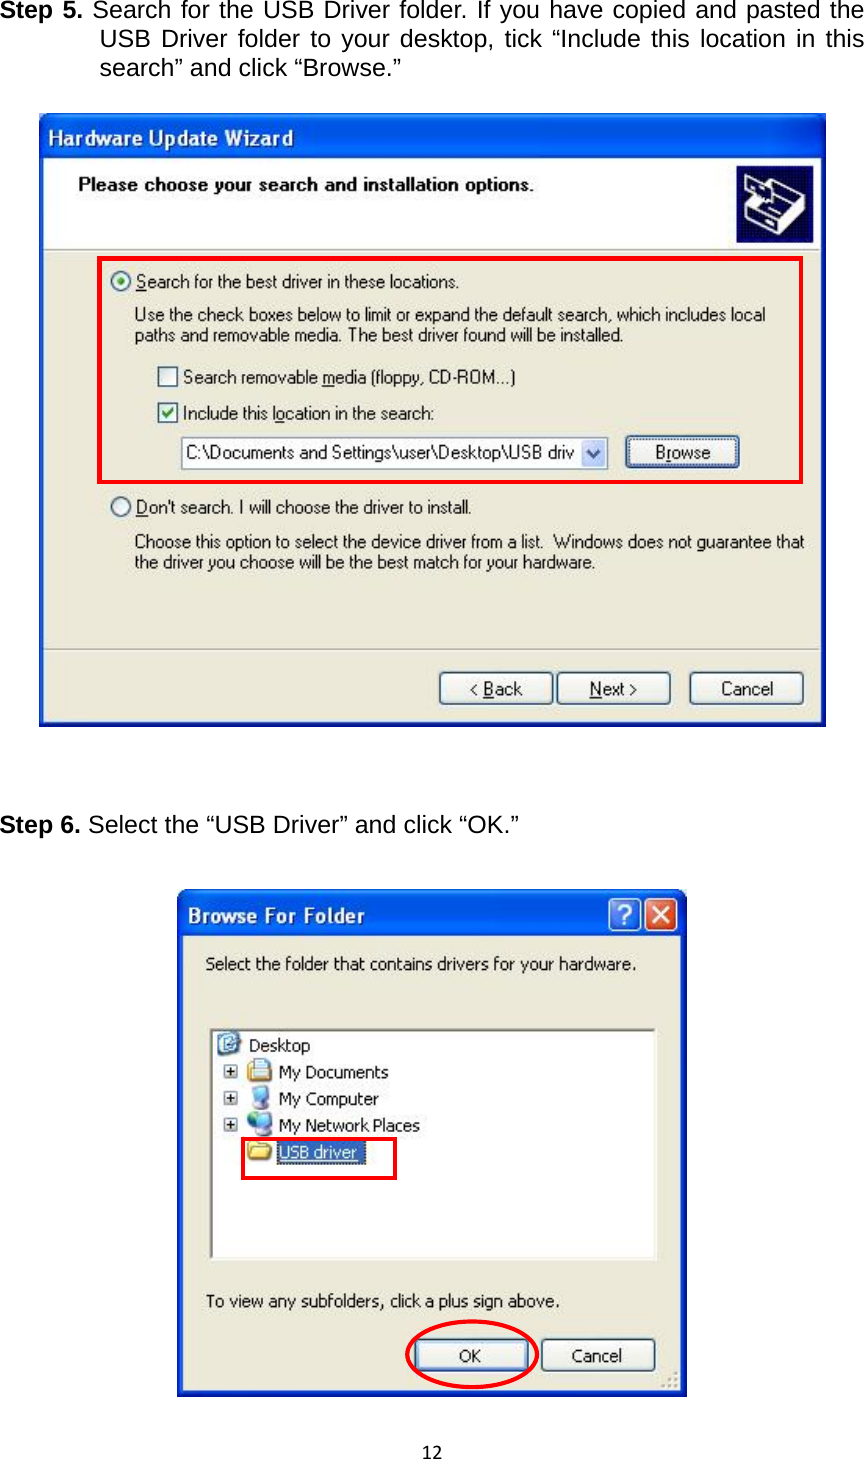 12Step 5. Search for the USB Driver folder. If you have copied and pasted the USB Driver folder to your desktop, tick “Include this location in this search” and click “Browse.”  Step 6. Select the “USB Driver” and click “OK.”  